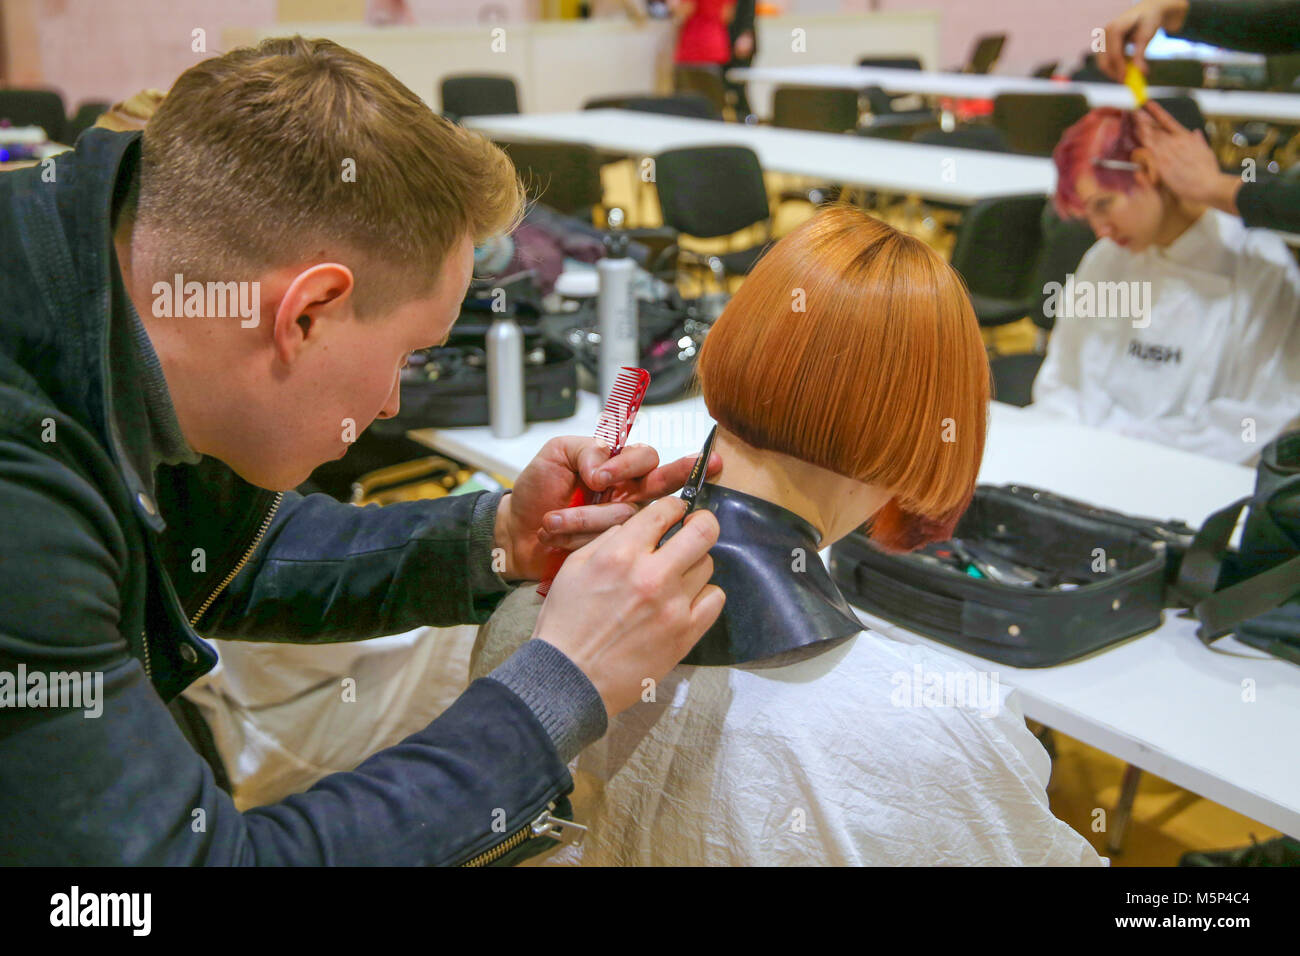 London UK 25 February 2018 Professional Beauty London open in London celebrating its 30 anniversary,the event that brings the lates products in hairdressing and beauty brought thousands of people to London excel to buy  products and to see live hair dresing demonstrations Credit: Paul Quezada-Neiman/Alamy Live News Stock Photo